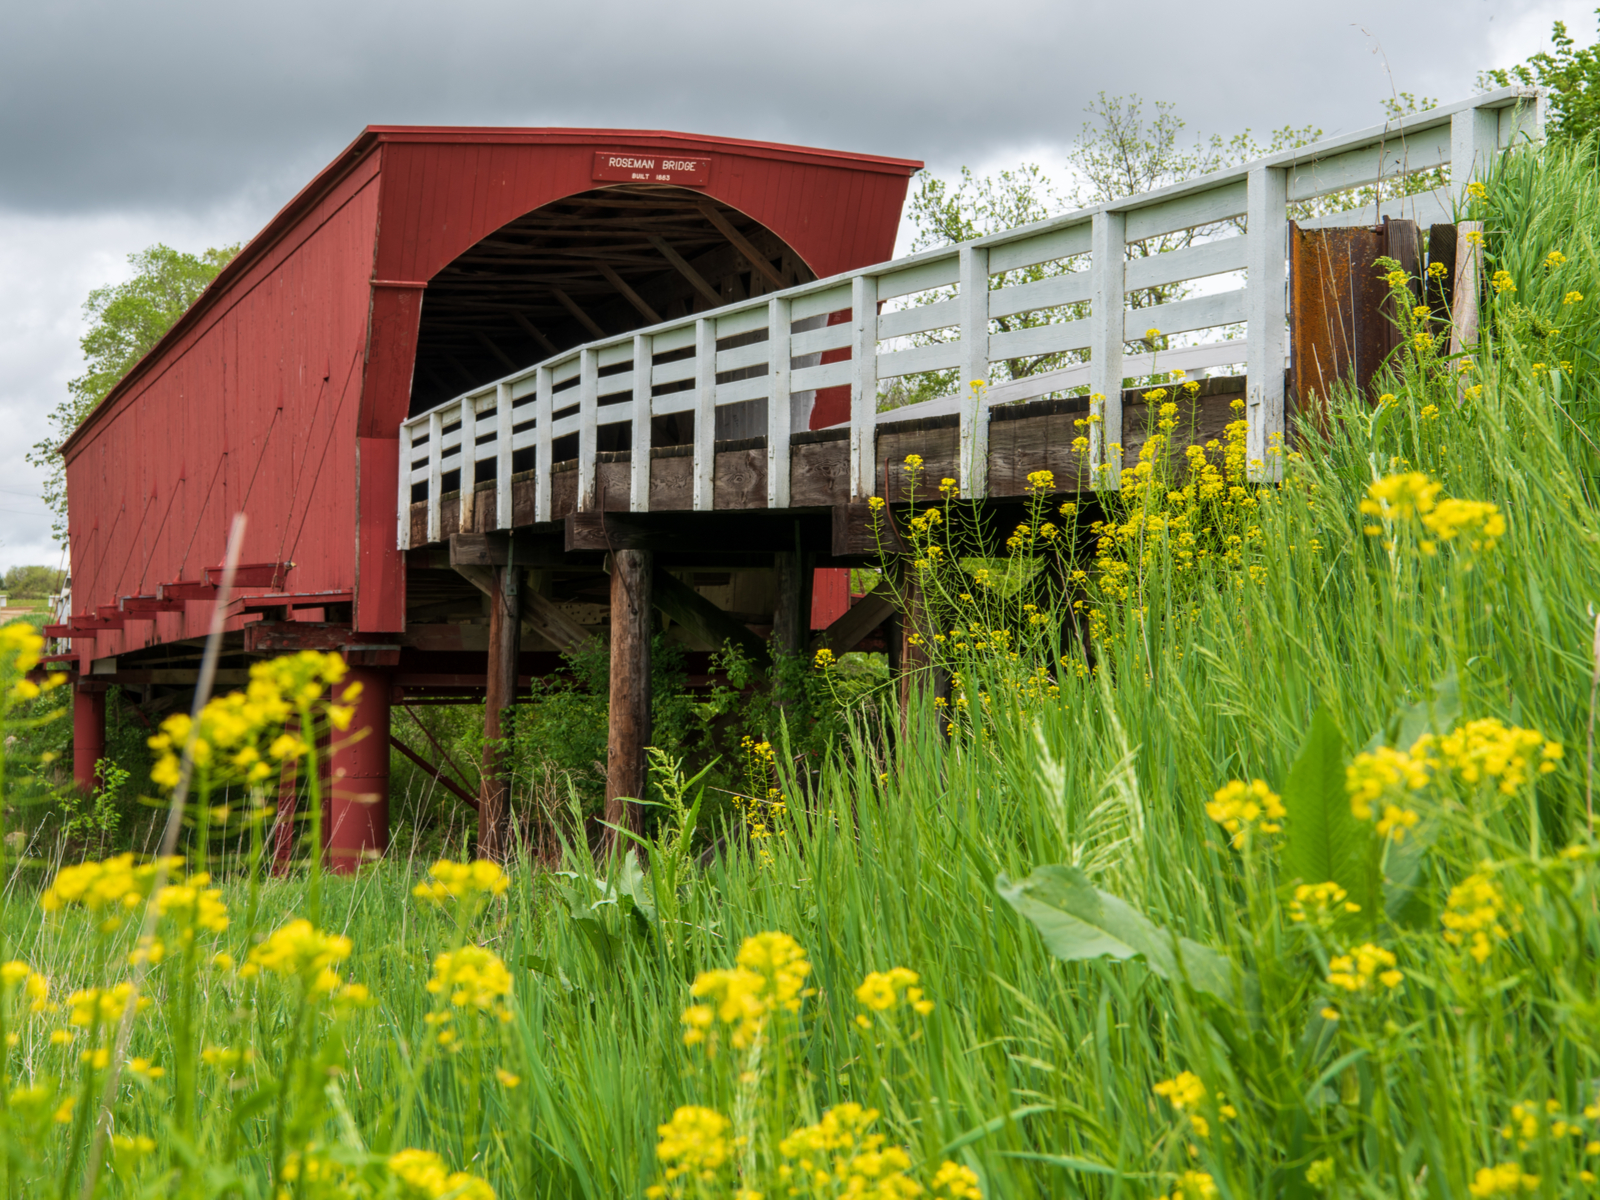 Cool view of a covered bridge, one of our picks for What to See in Iowa